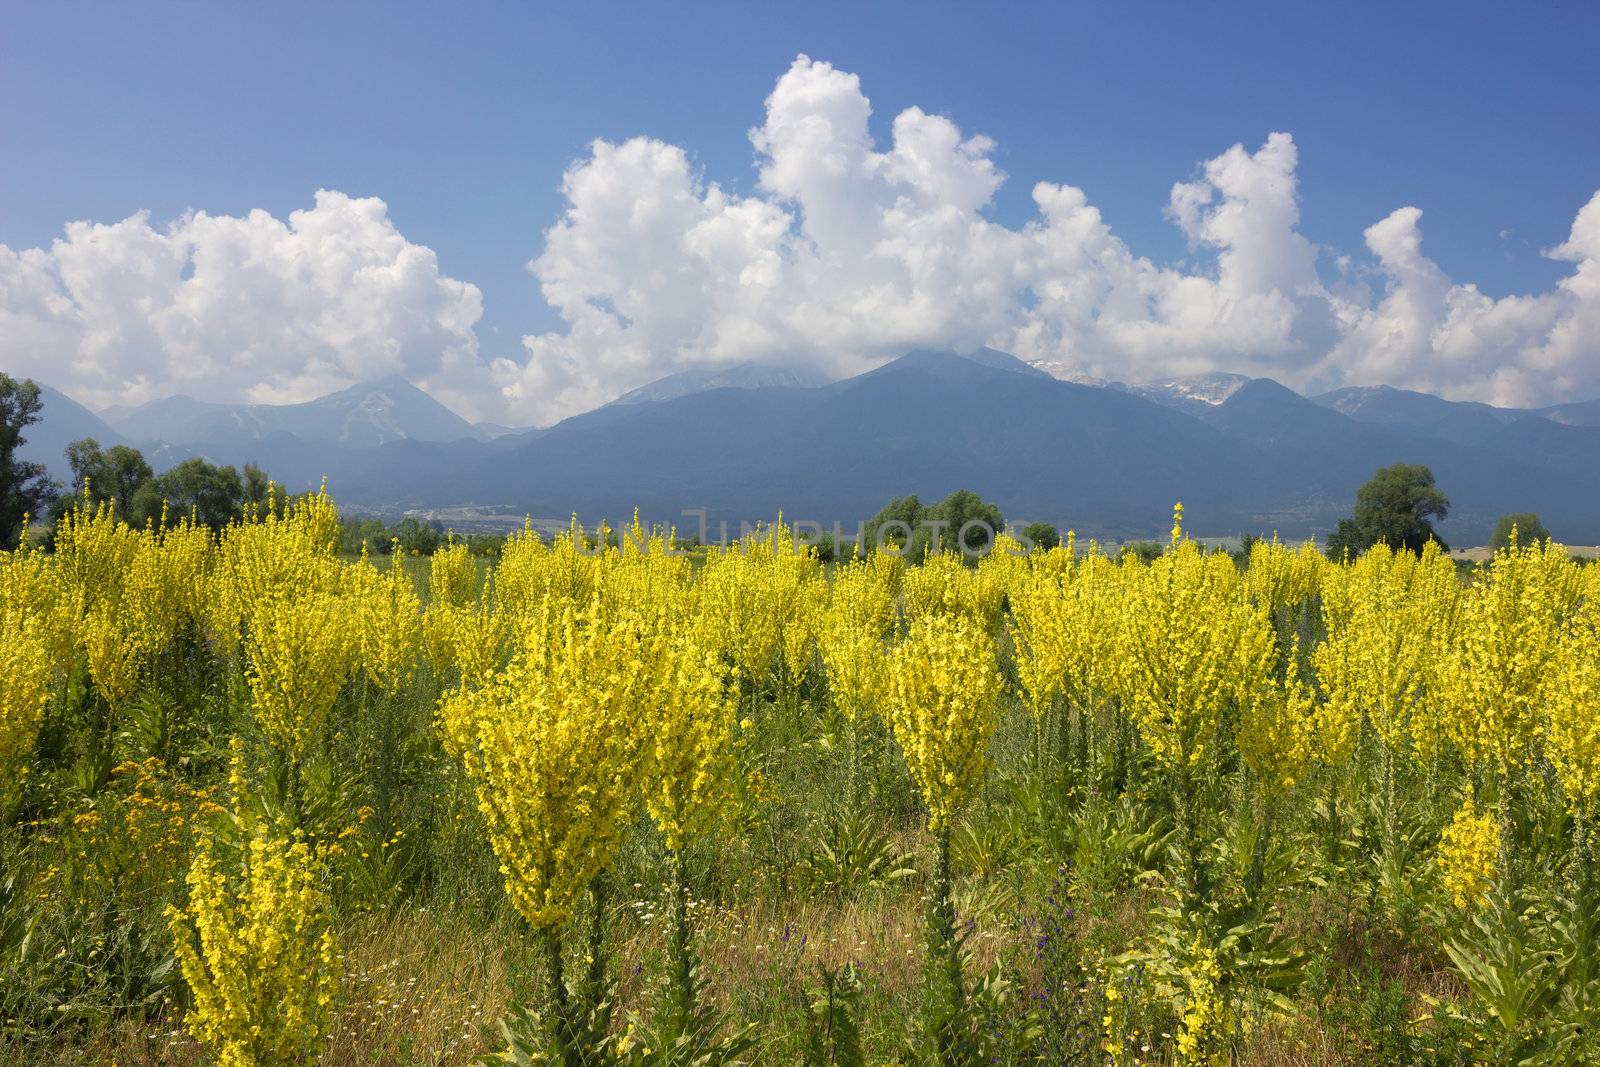 Yellow field of mullein with Pirin mountains in Bulgaria at the background, shot over blue sky with bright white clouds.